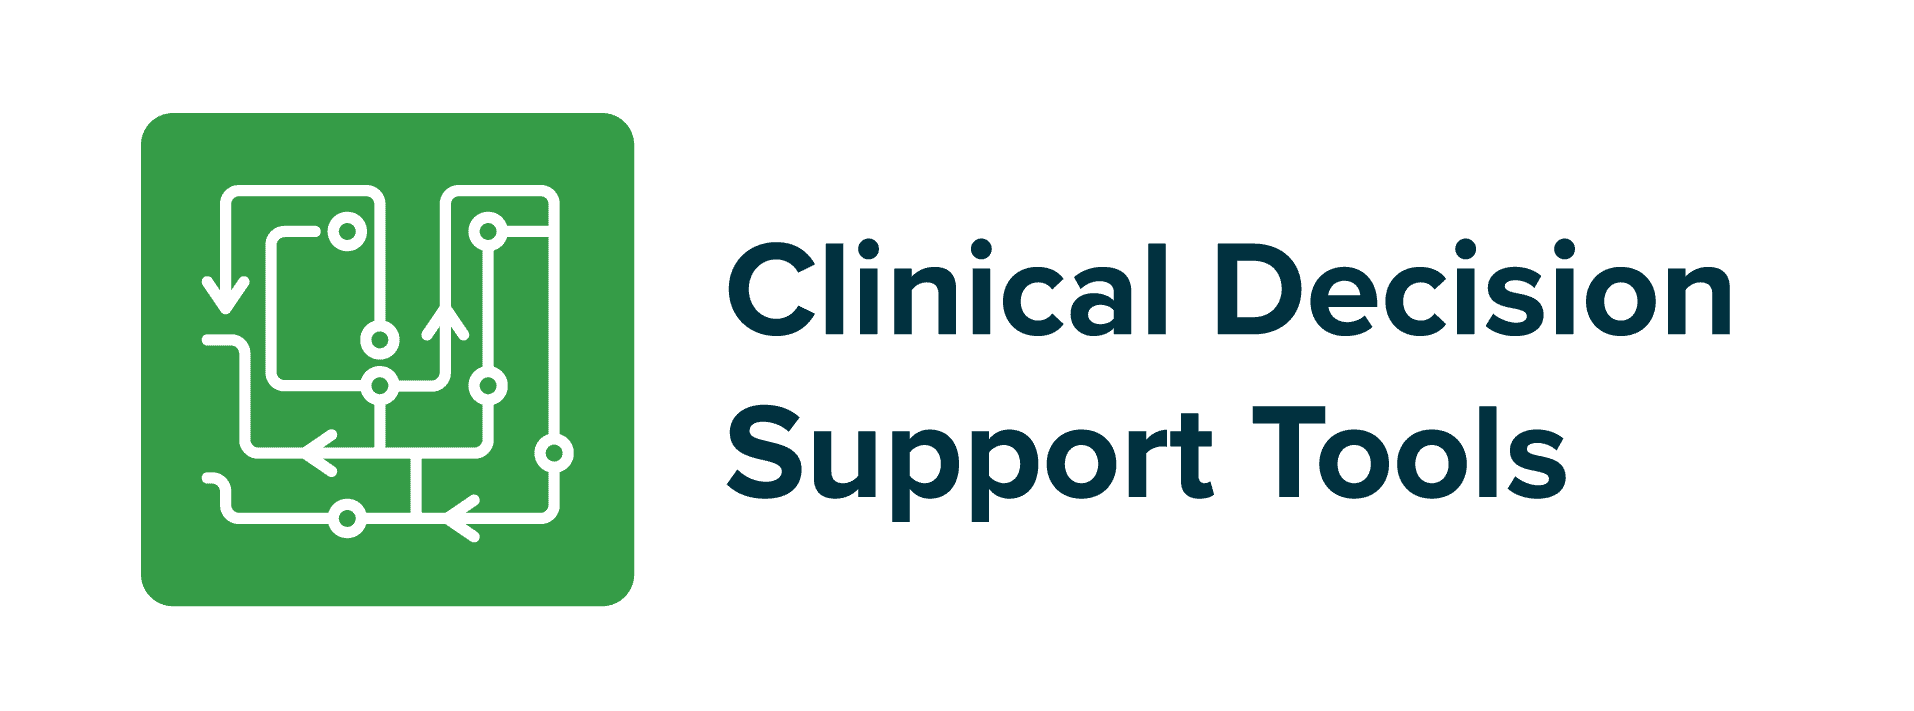 Clinical Decision Support Tools